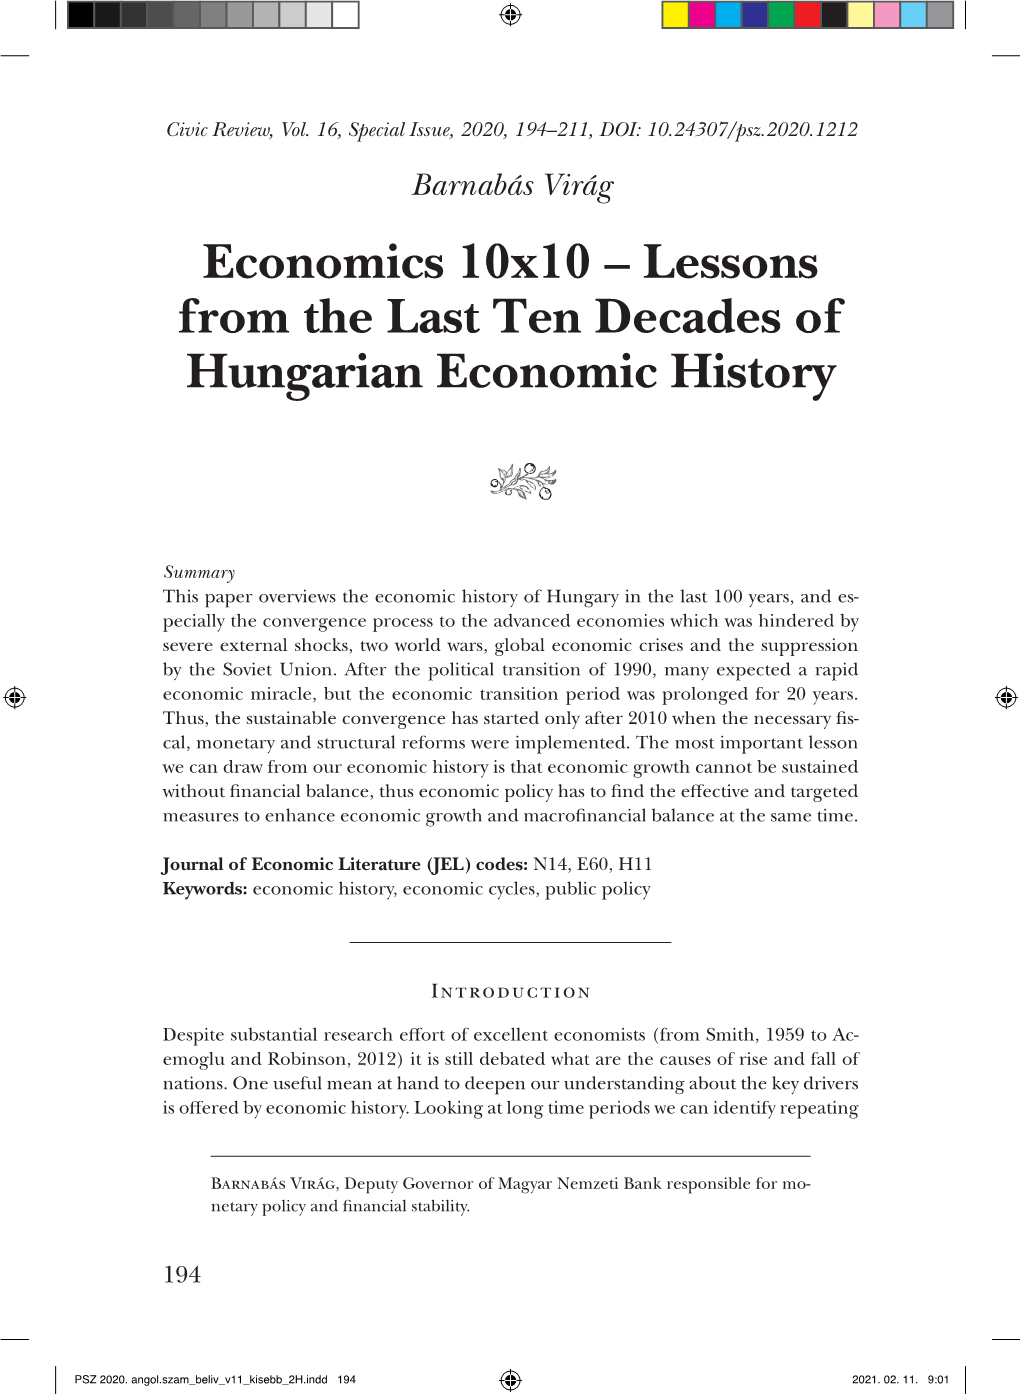 Lessons from the Last Ten Decades of Hungarian Economic History